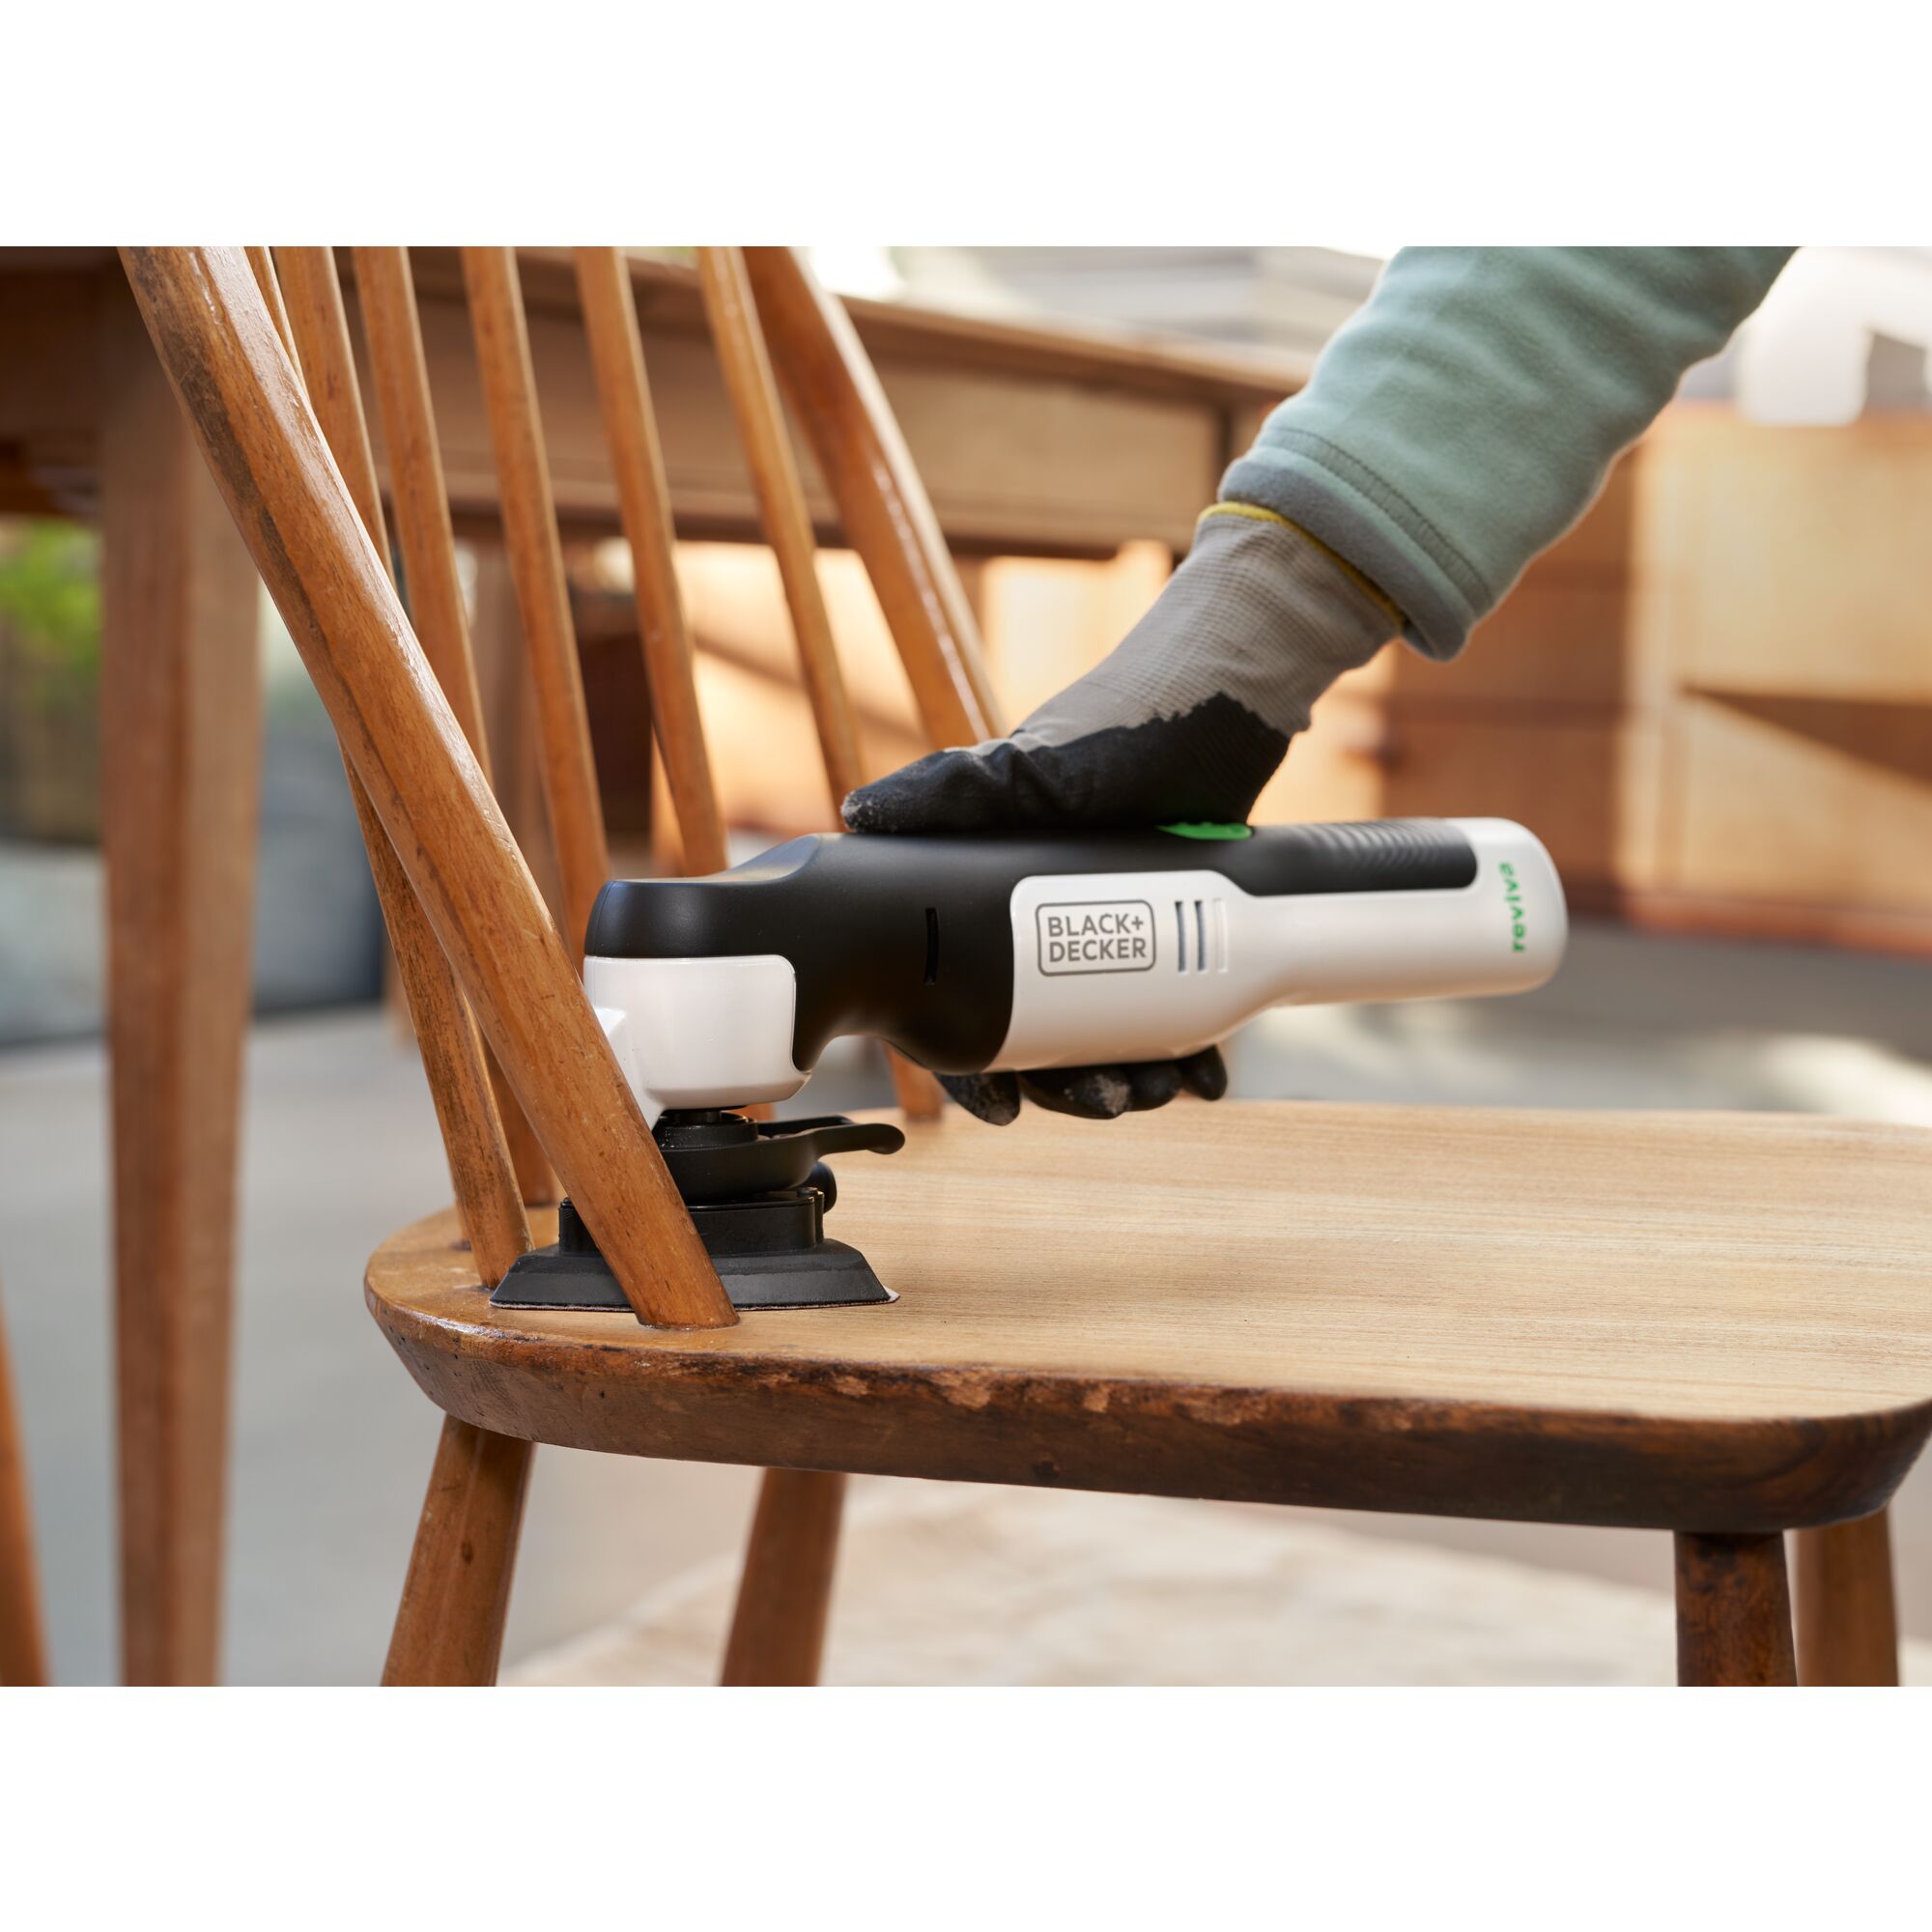 reviva 12V MAX* Oscillating Multi-Tool sanding in between spindles on a chair.